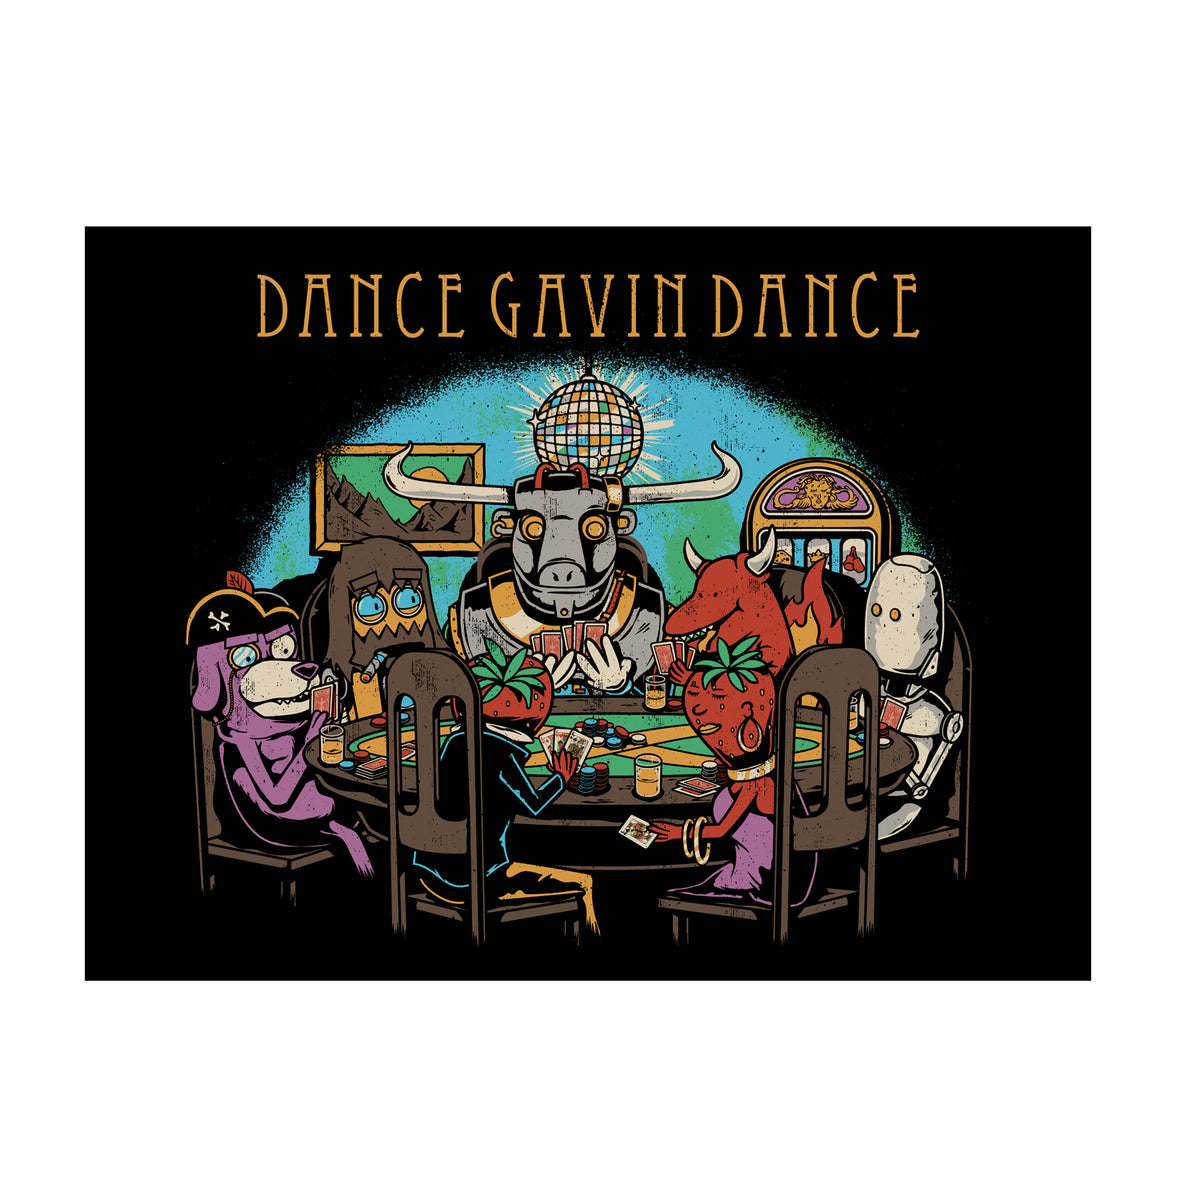 image of a black rectangle poster on a white background. poster is of various dance gavin dance characters sitting at a table playing poker. at the top says dance gavin dance